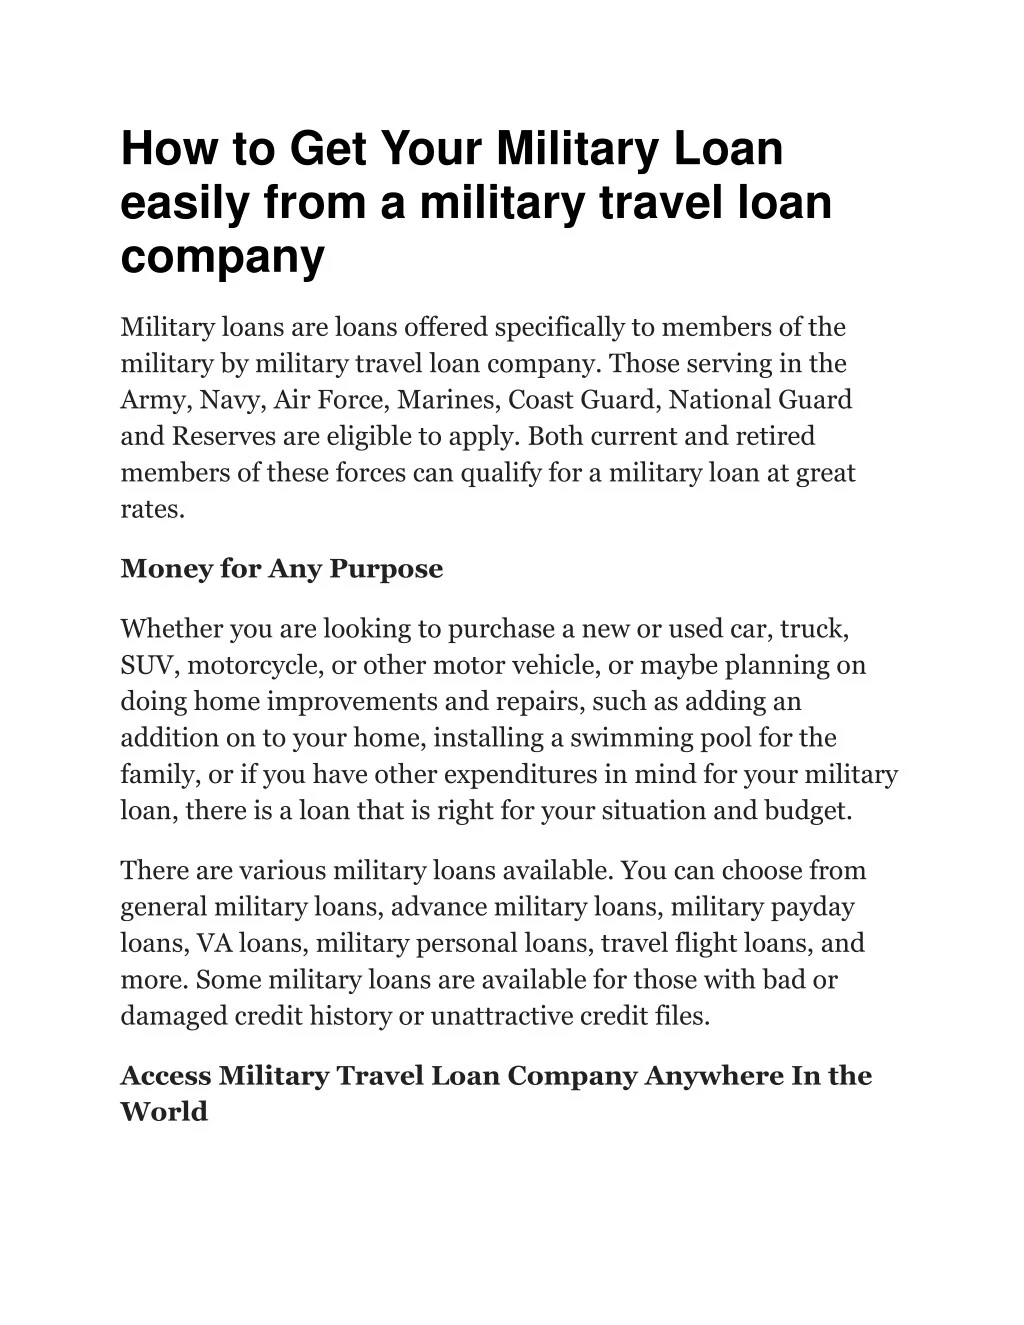 how to get your military loan easily from